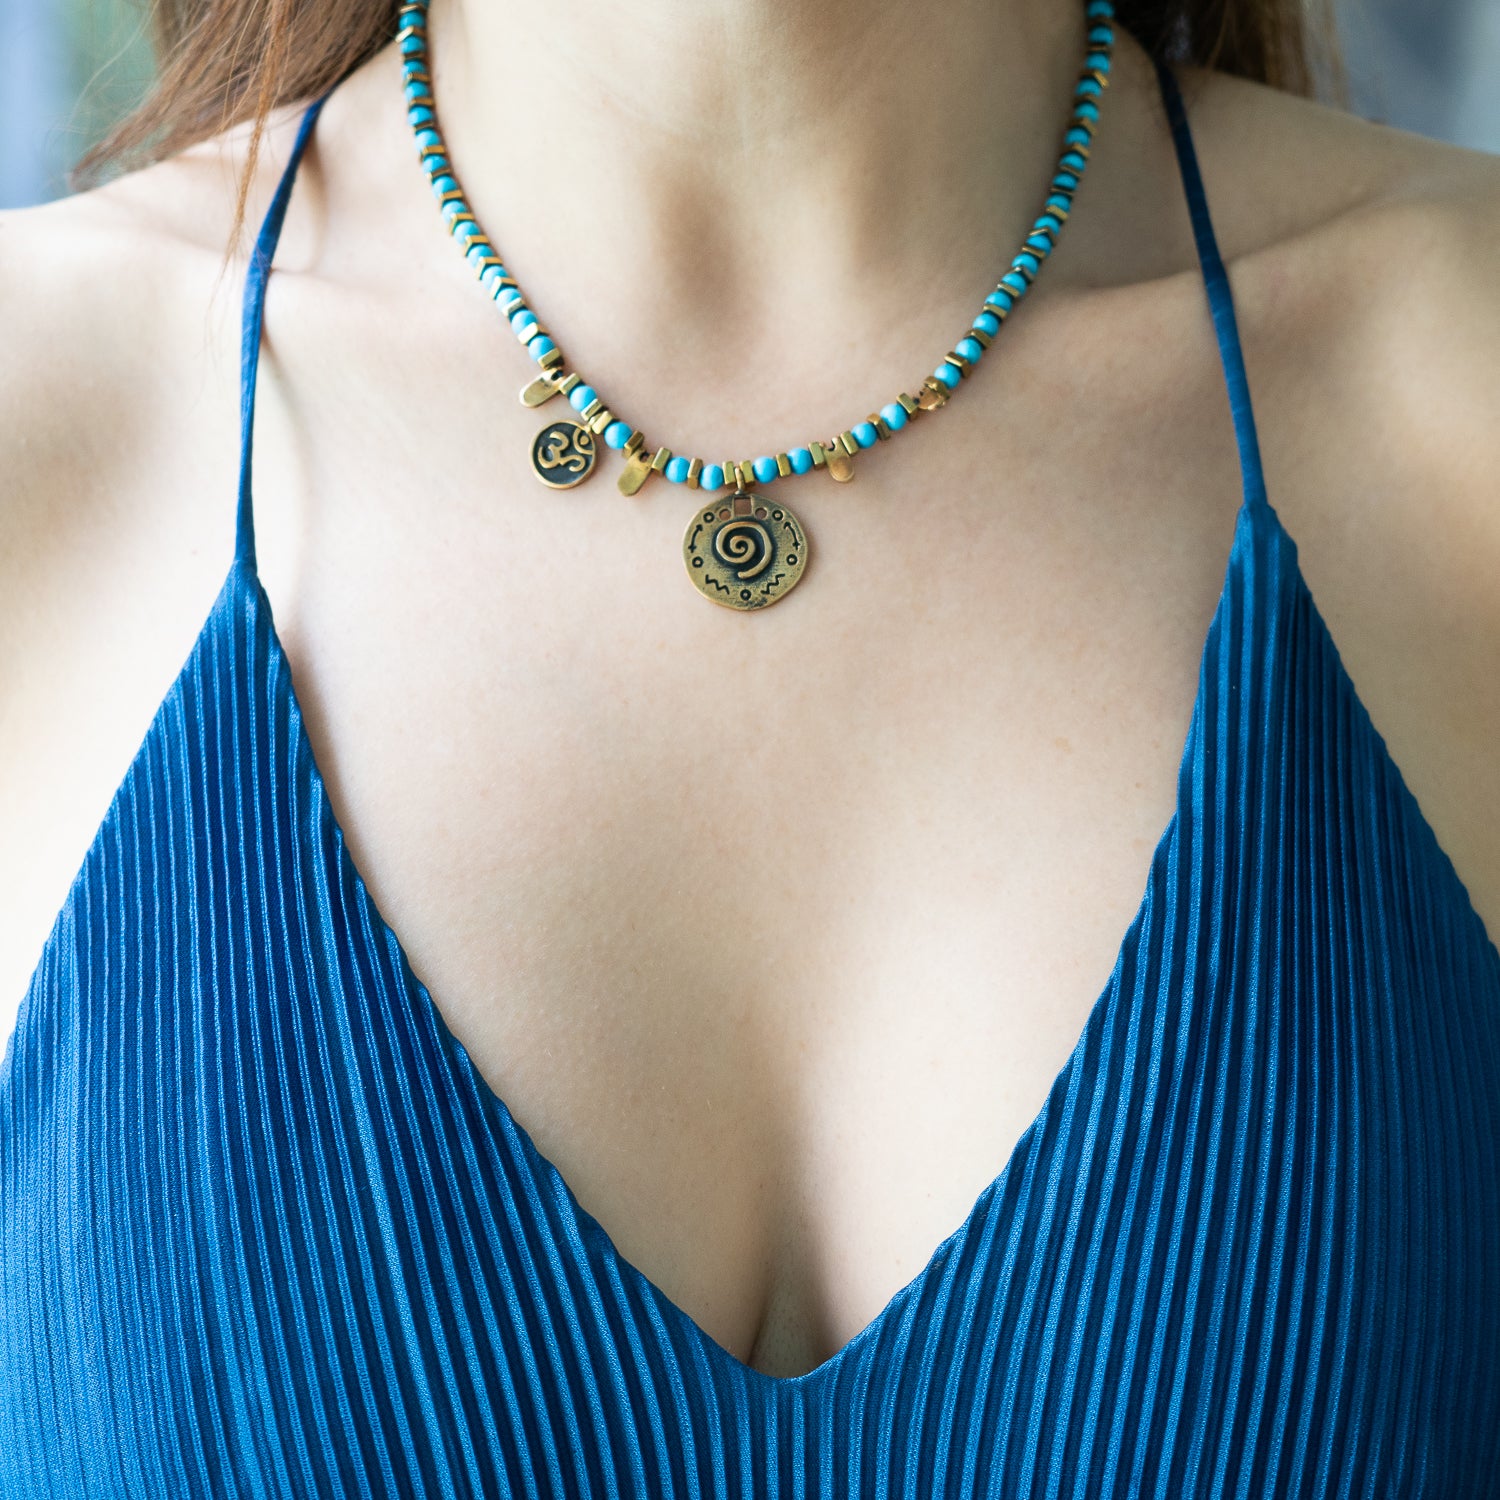 Model wearing the Turquoise Spiral Necklace, exuding a sense of calmness and embracing the positive energy it represents.